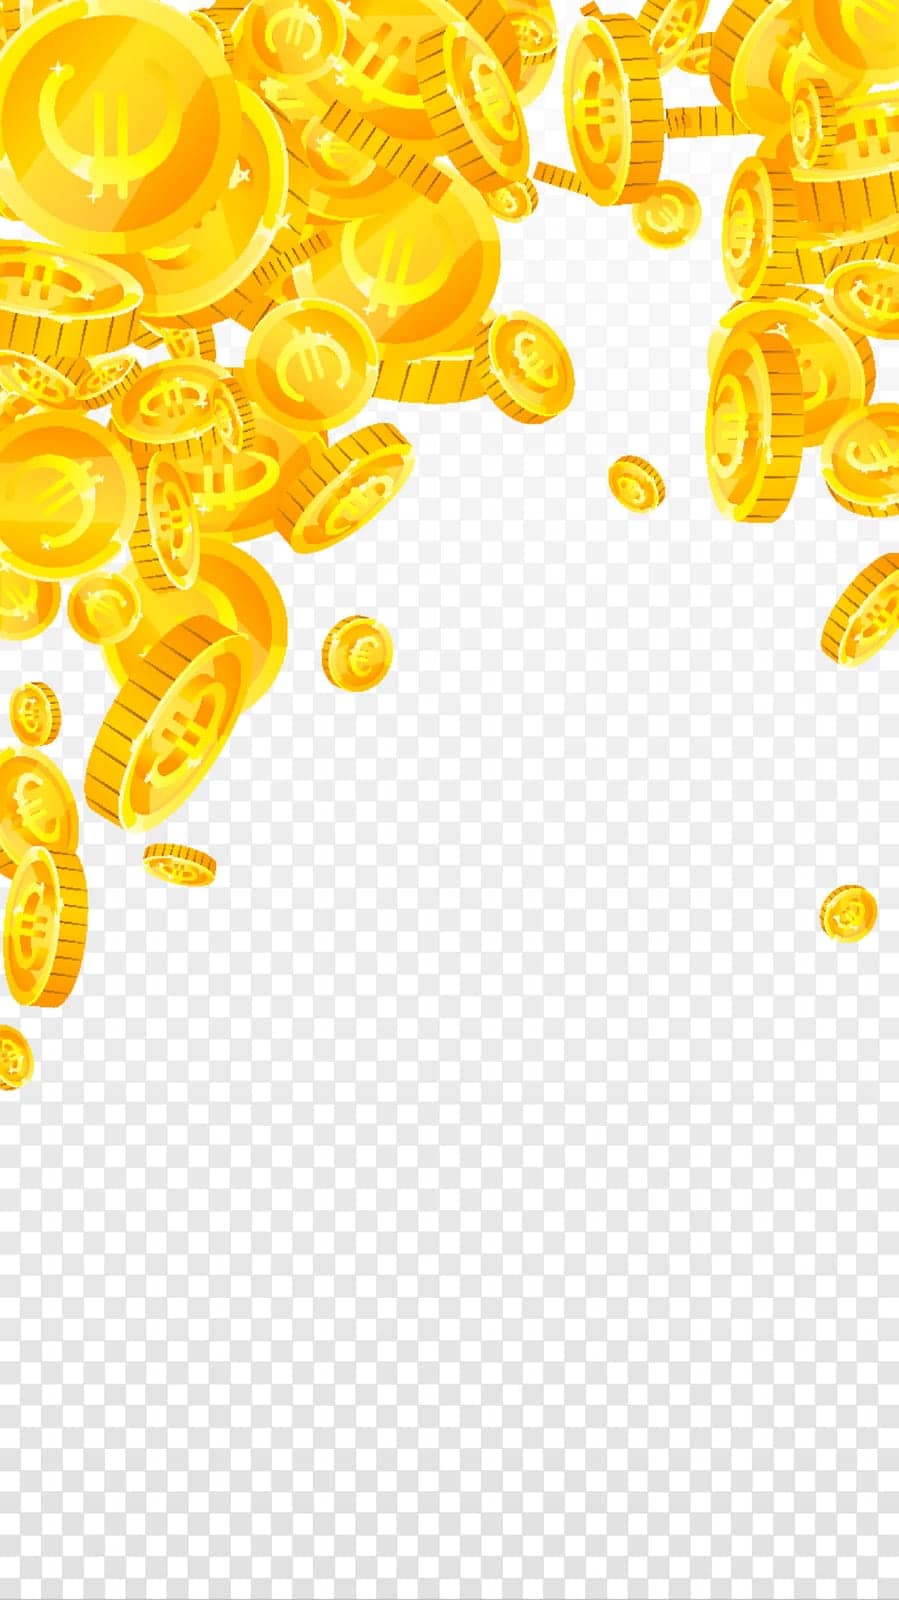 European Union Euro coins falling. Scattered gold EUR coins. Europe money. Global financial crisis concept. Vector illustration.